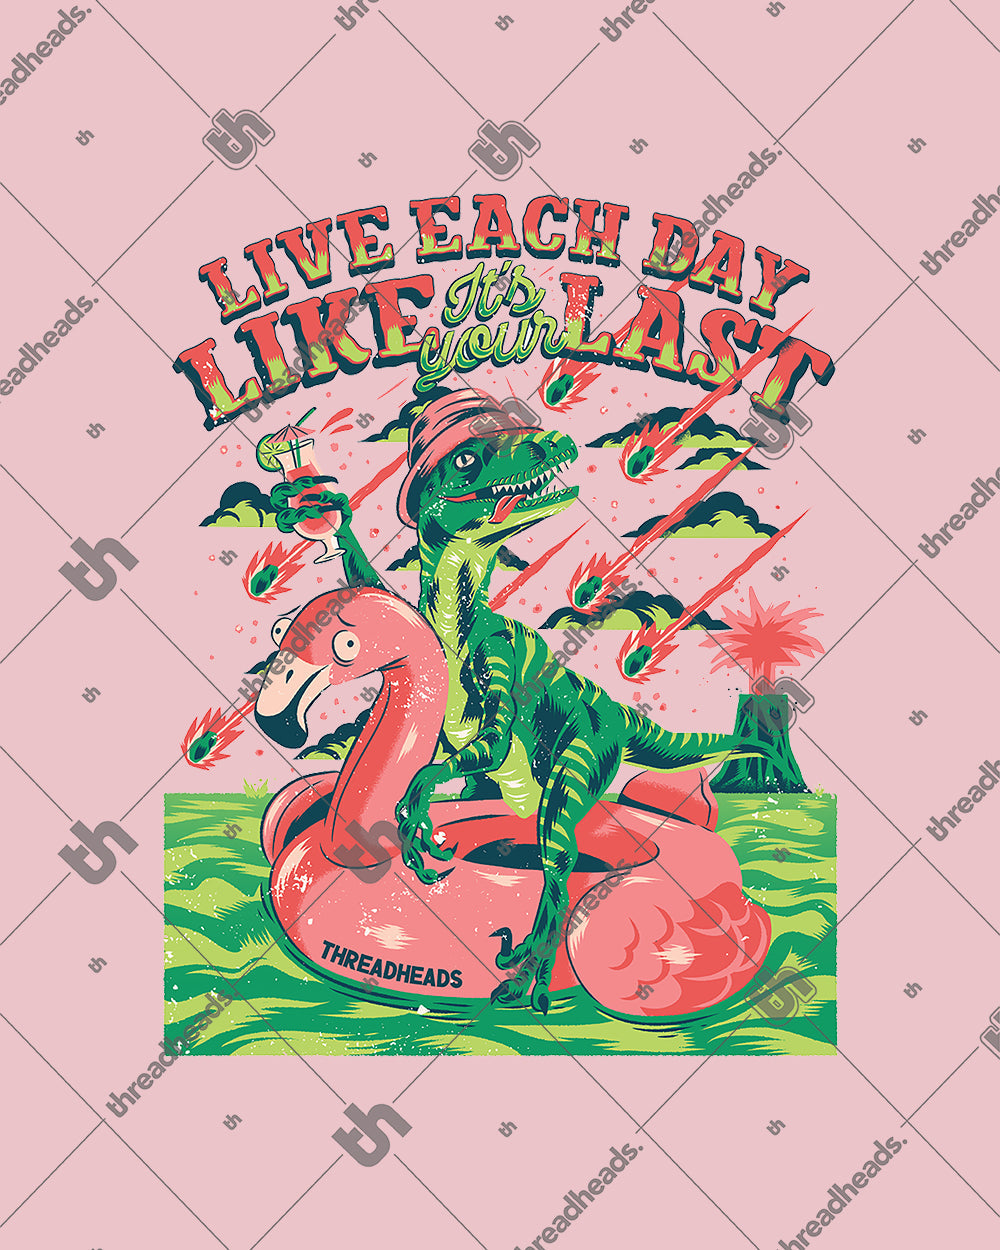 Live Each Day Like It's Your Last Crop Tee Australia Online #colour_pink